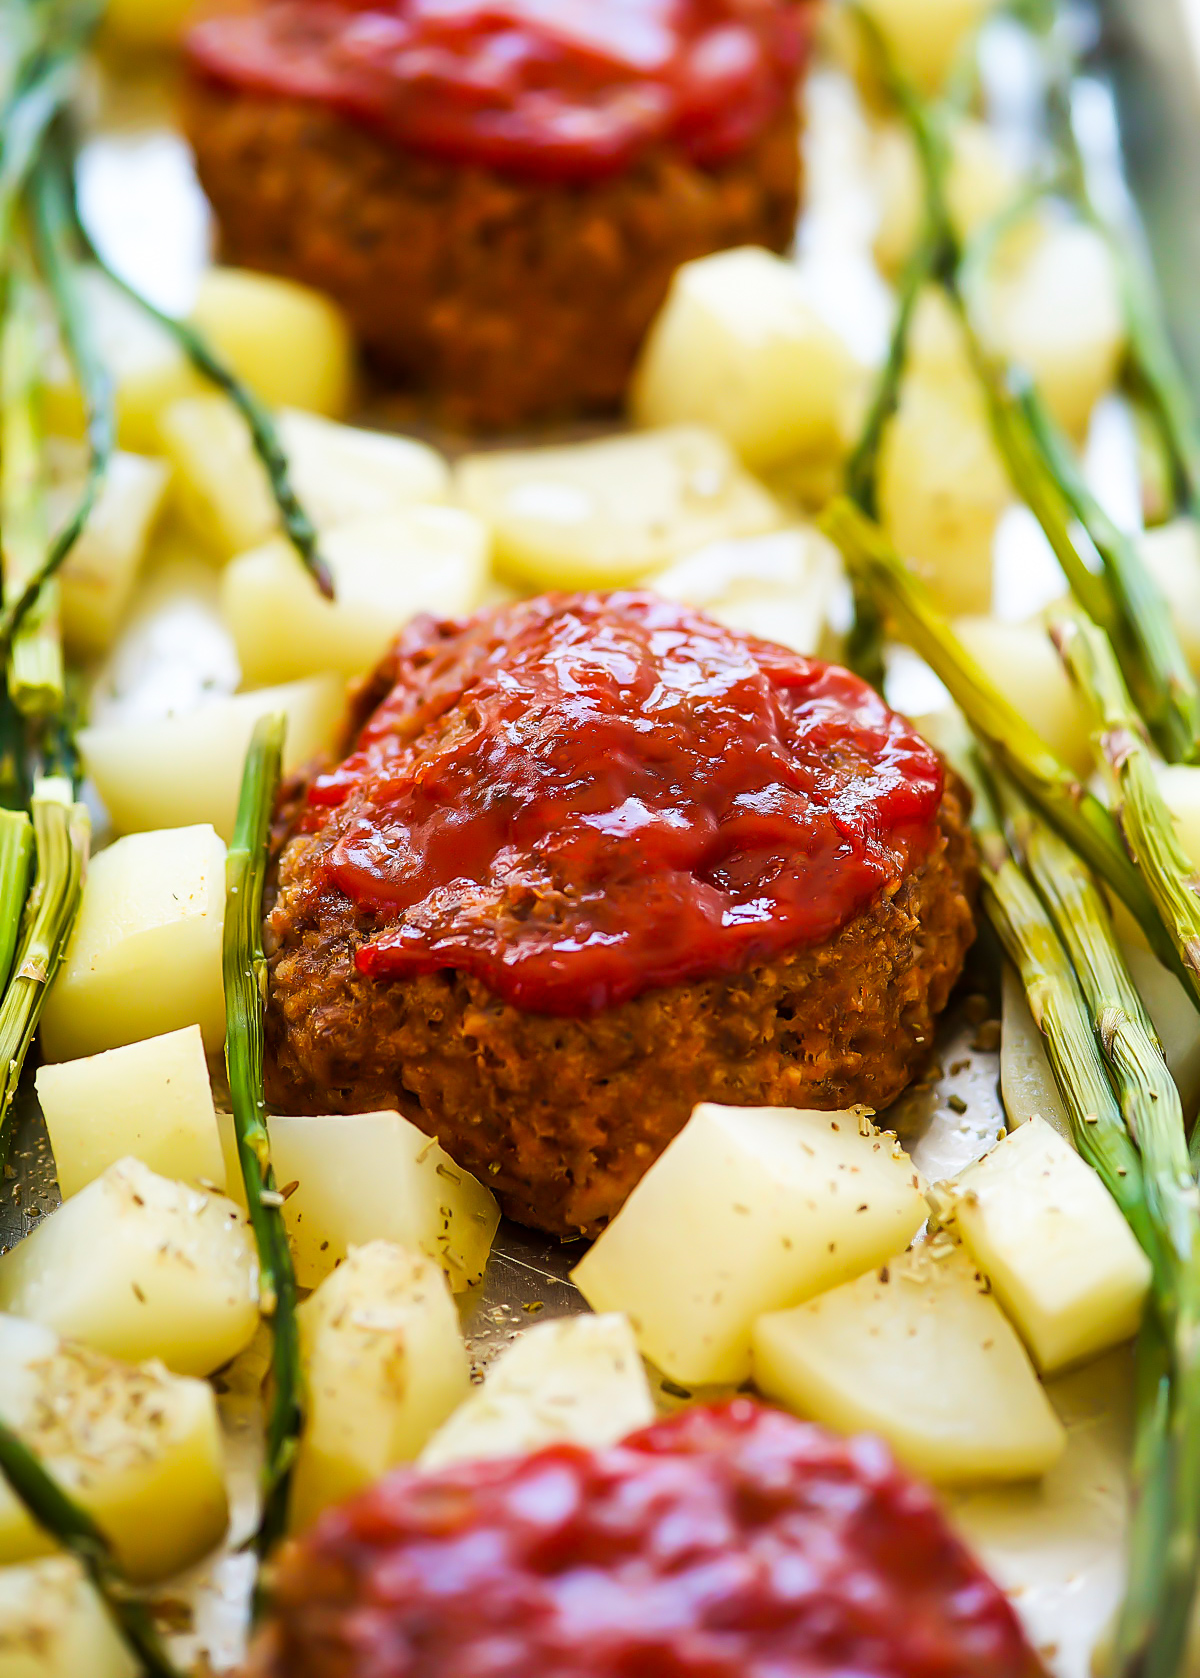 Sheet Pan Meatloaf dinner is individual mini meatloaves, asparagus, and potatoes all cooked to perfection on one pan.